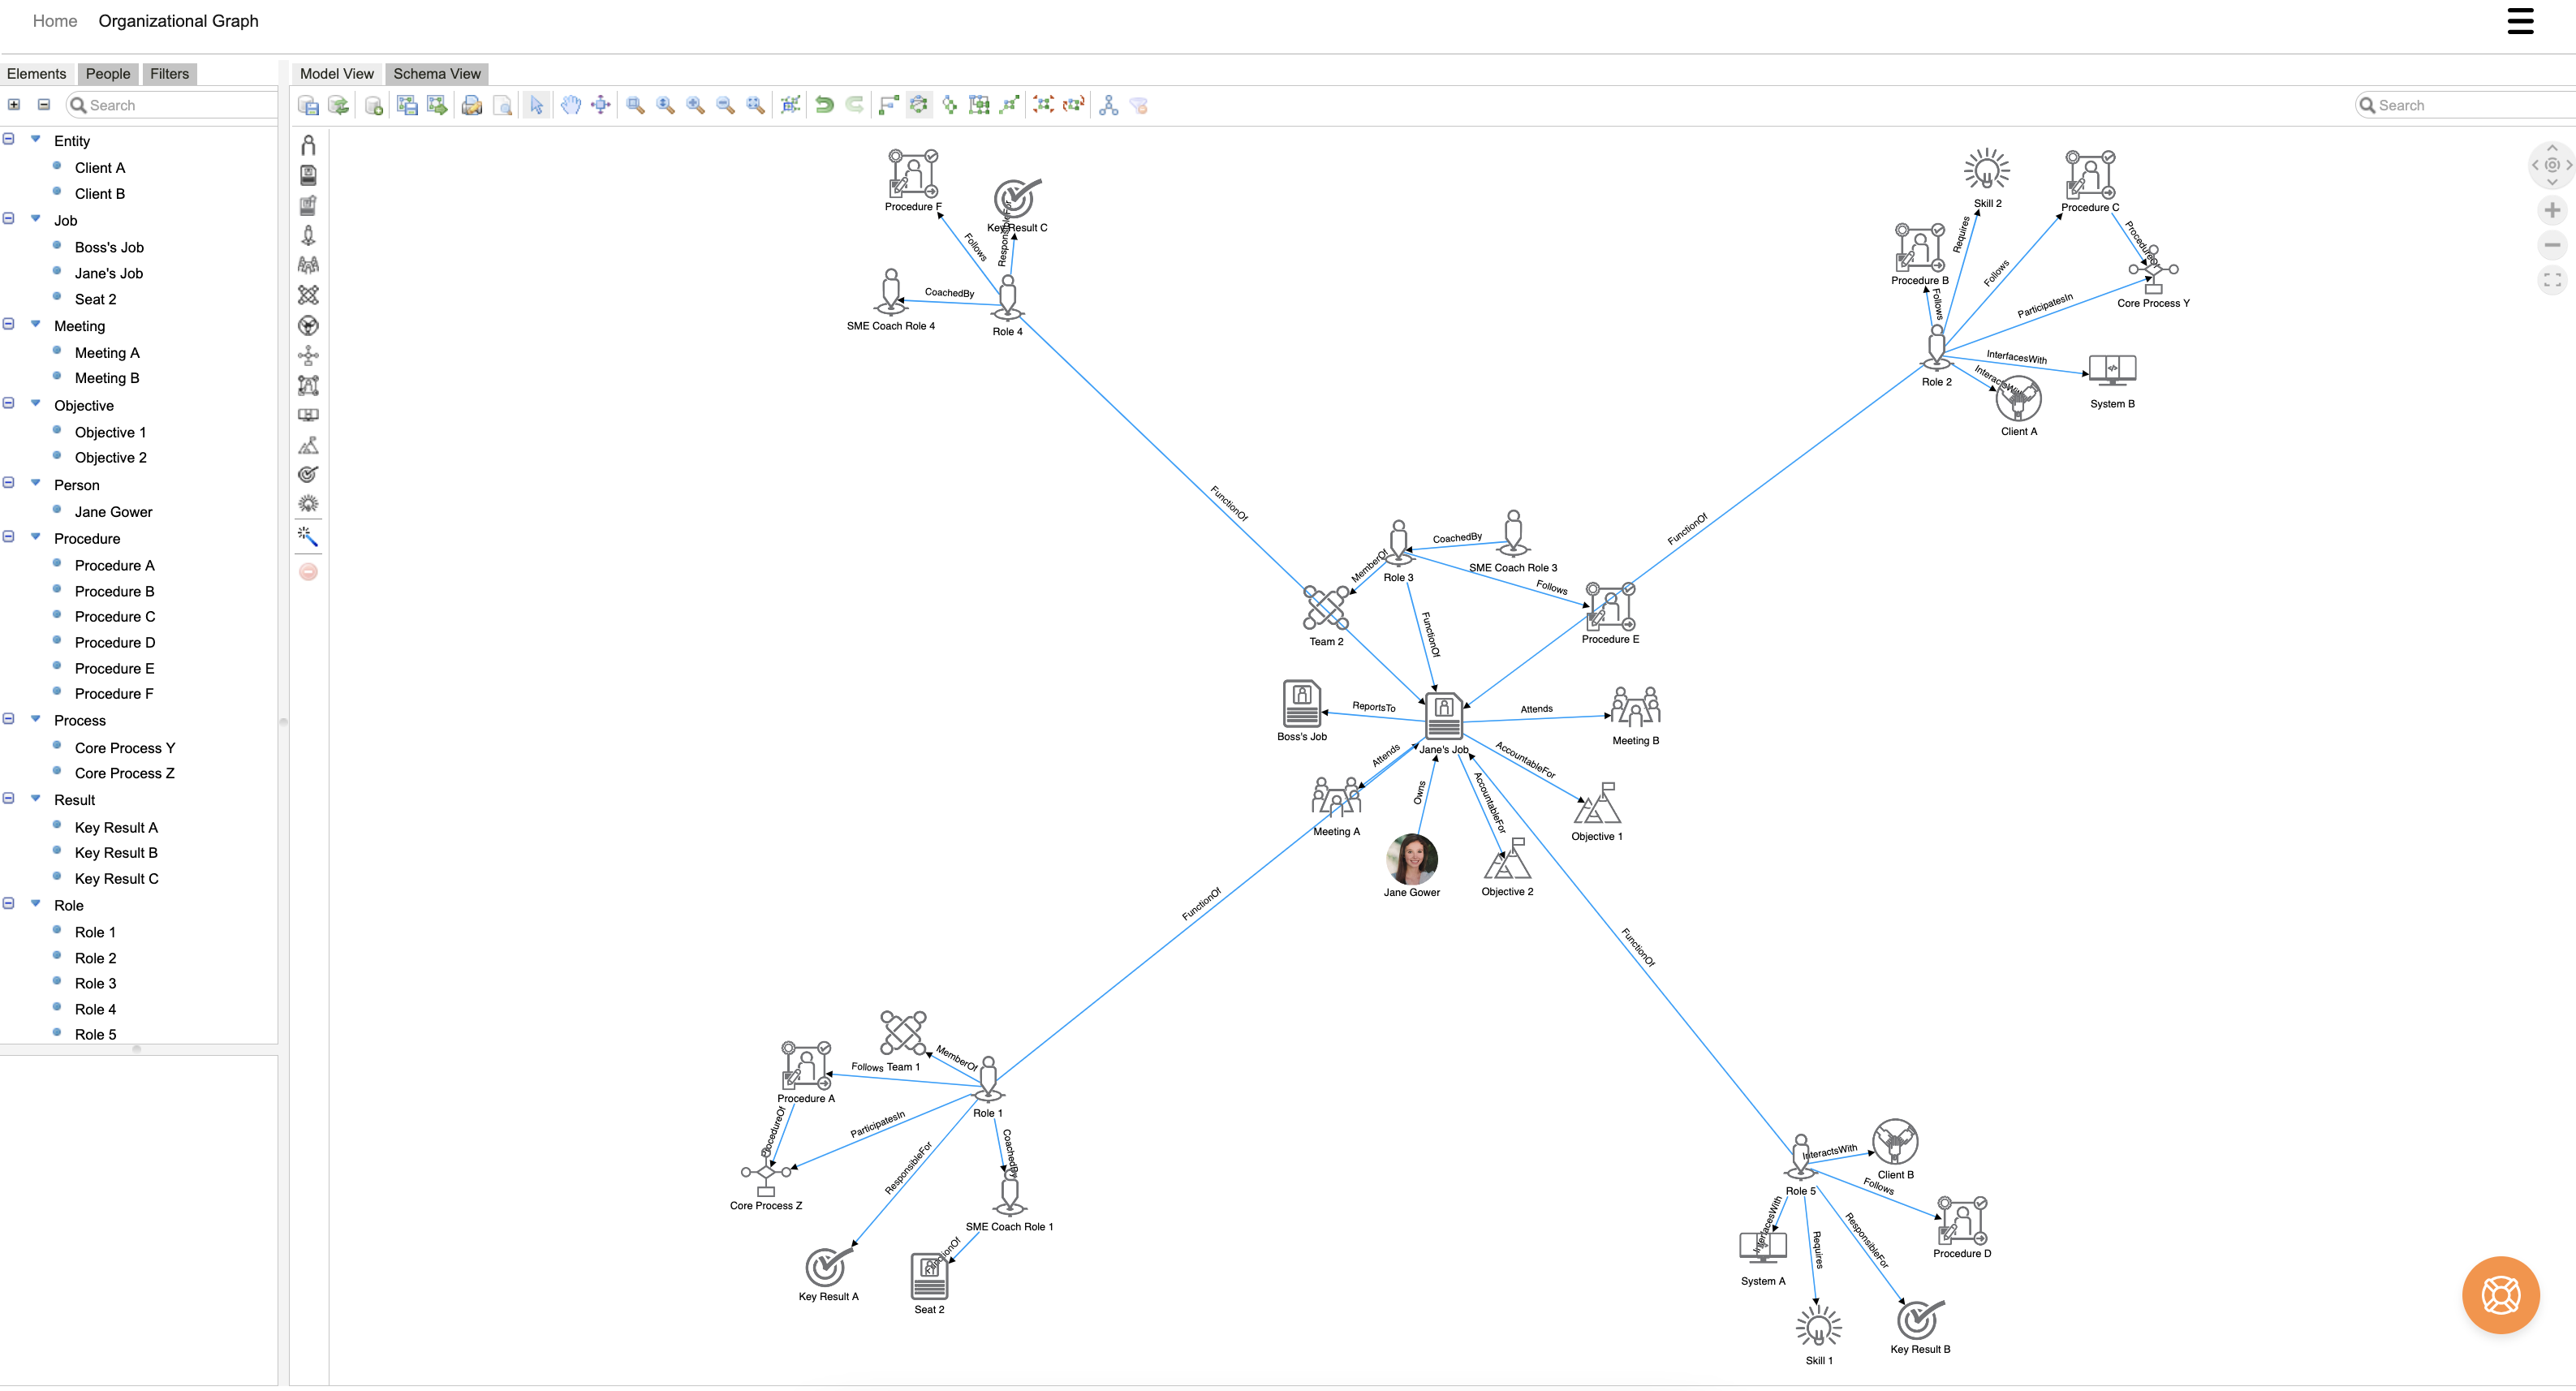 Employees can visualize how they connect to the company at a fine level.